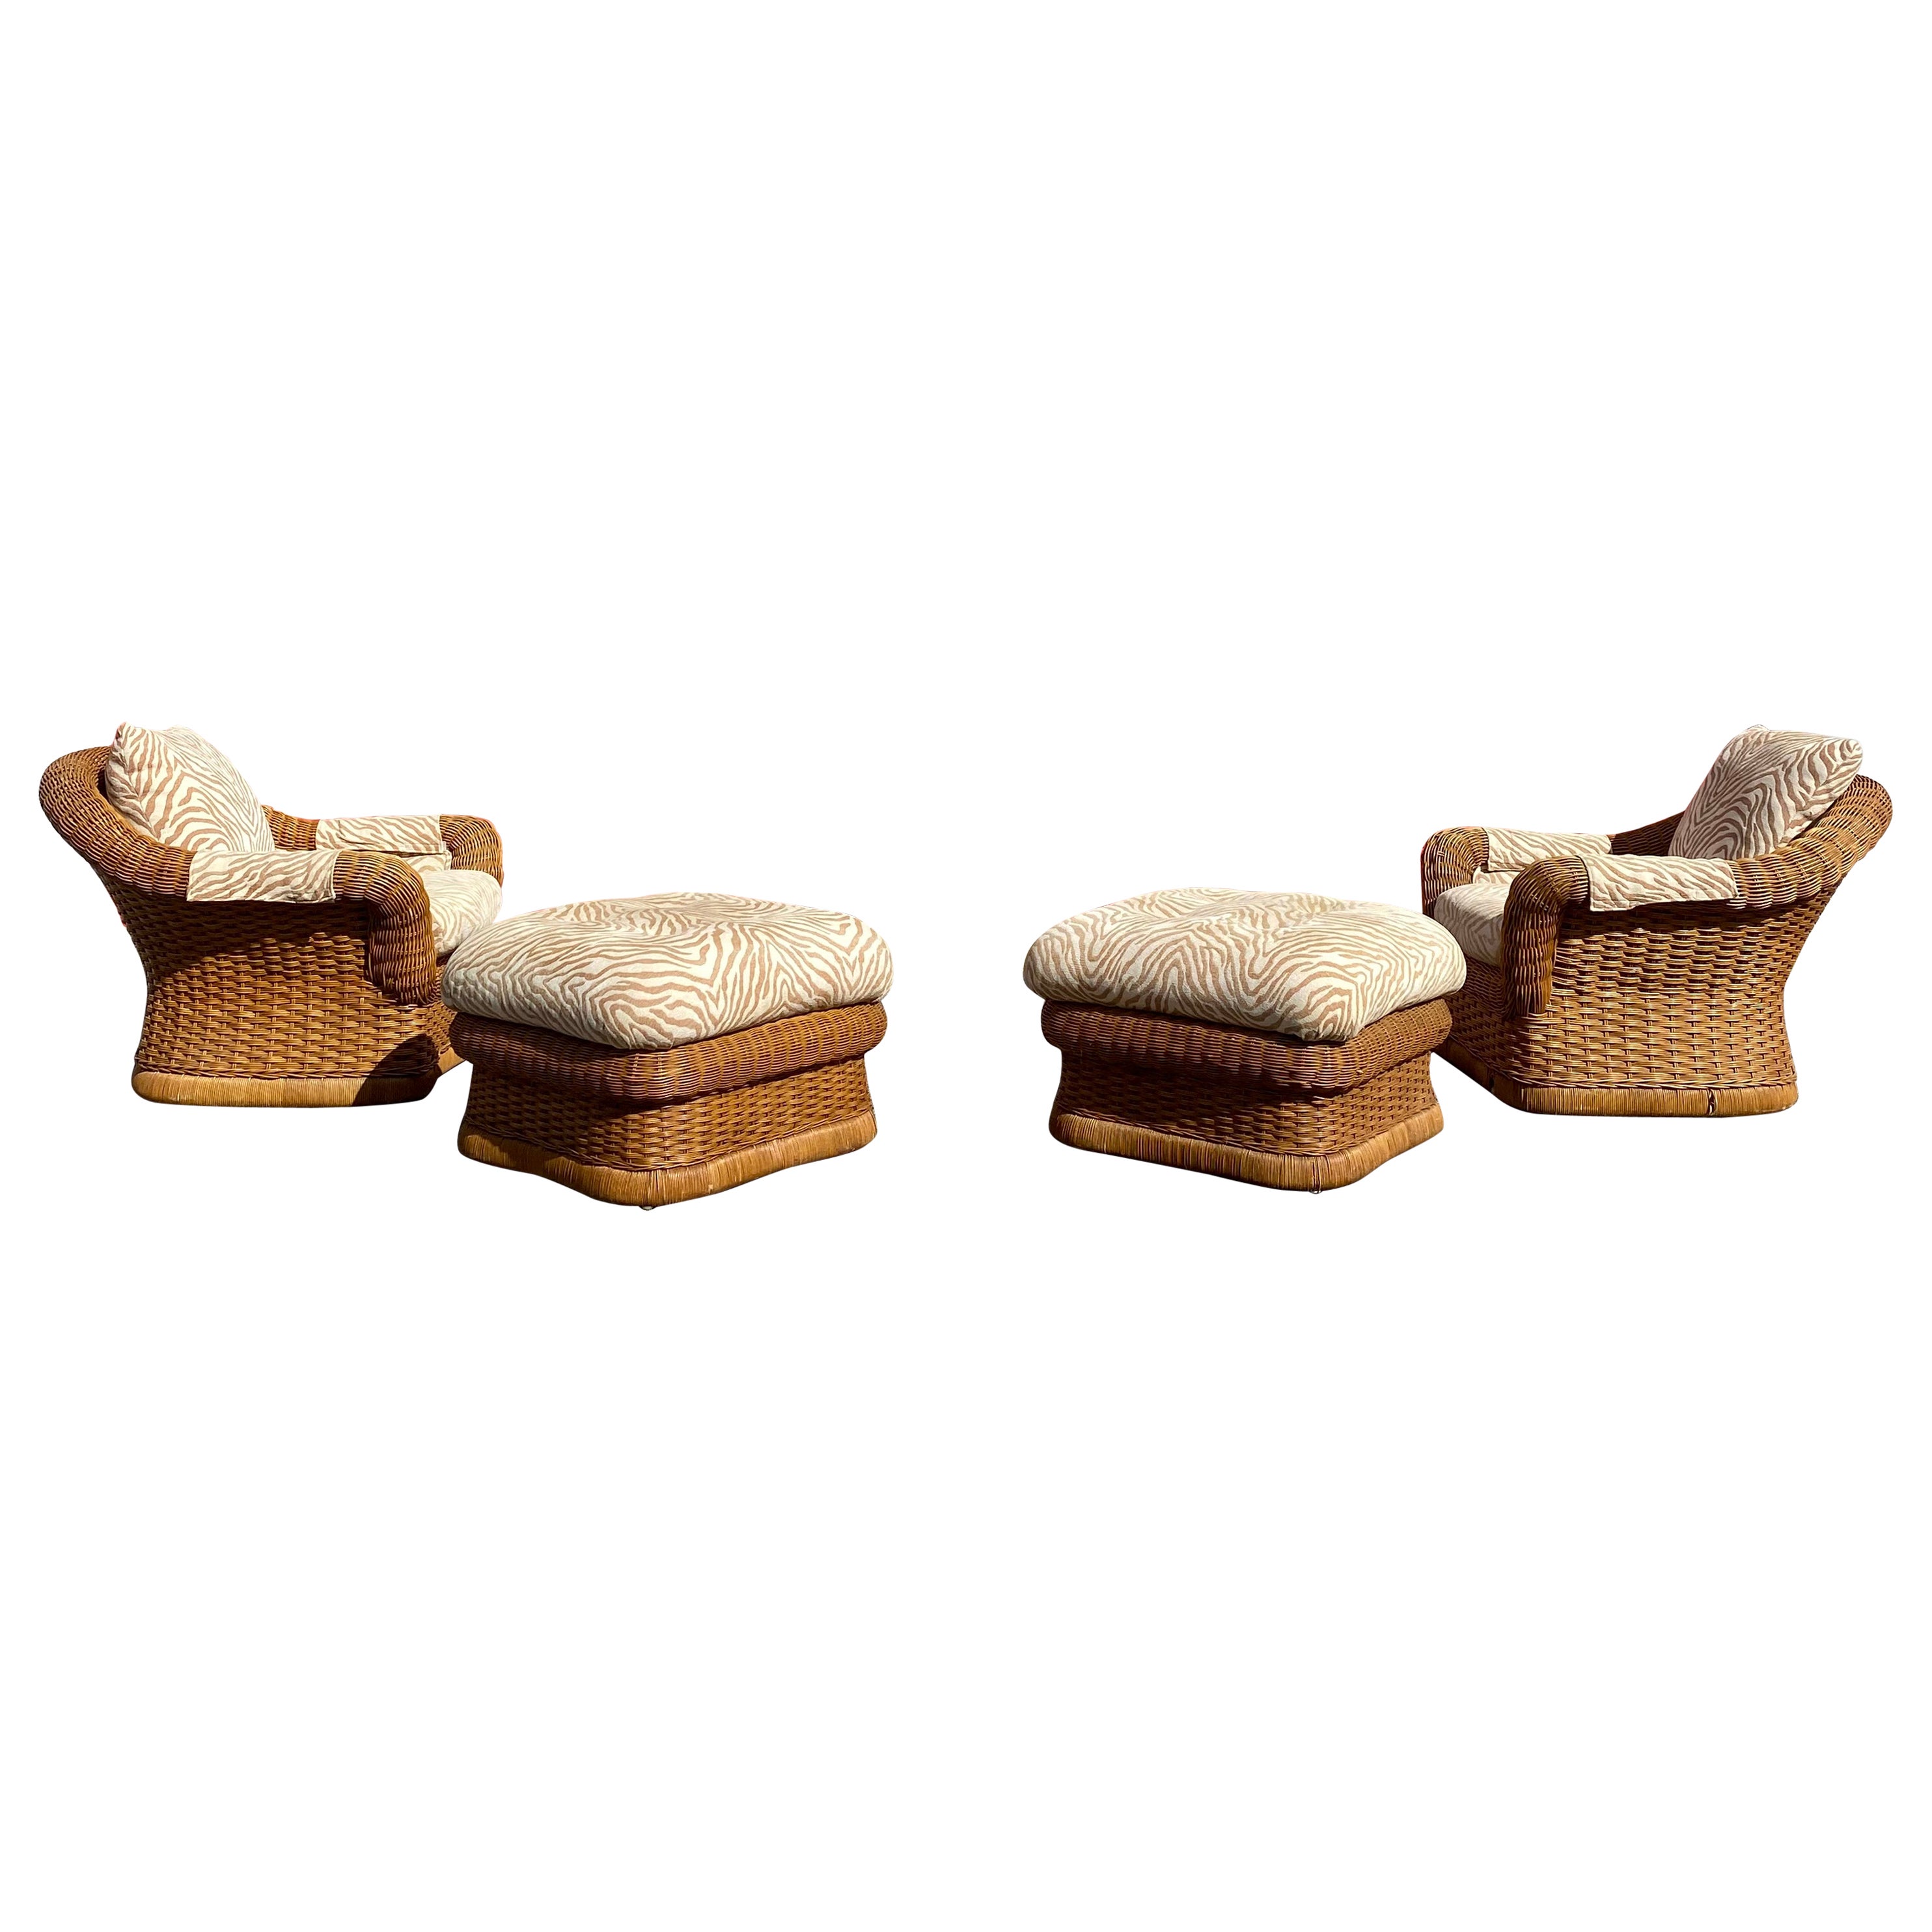 1970s Ficks Reed Woven Rattan Zebra Chairs and Ottomans, Set of 4 For Sale